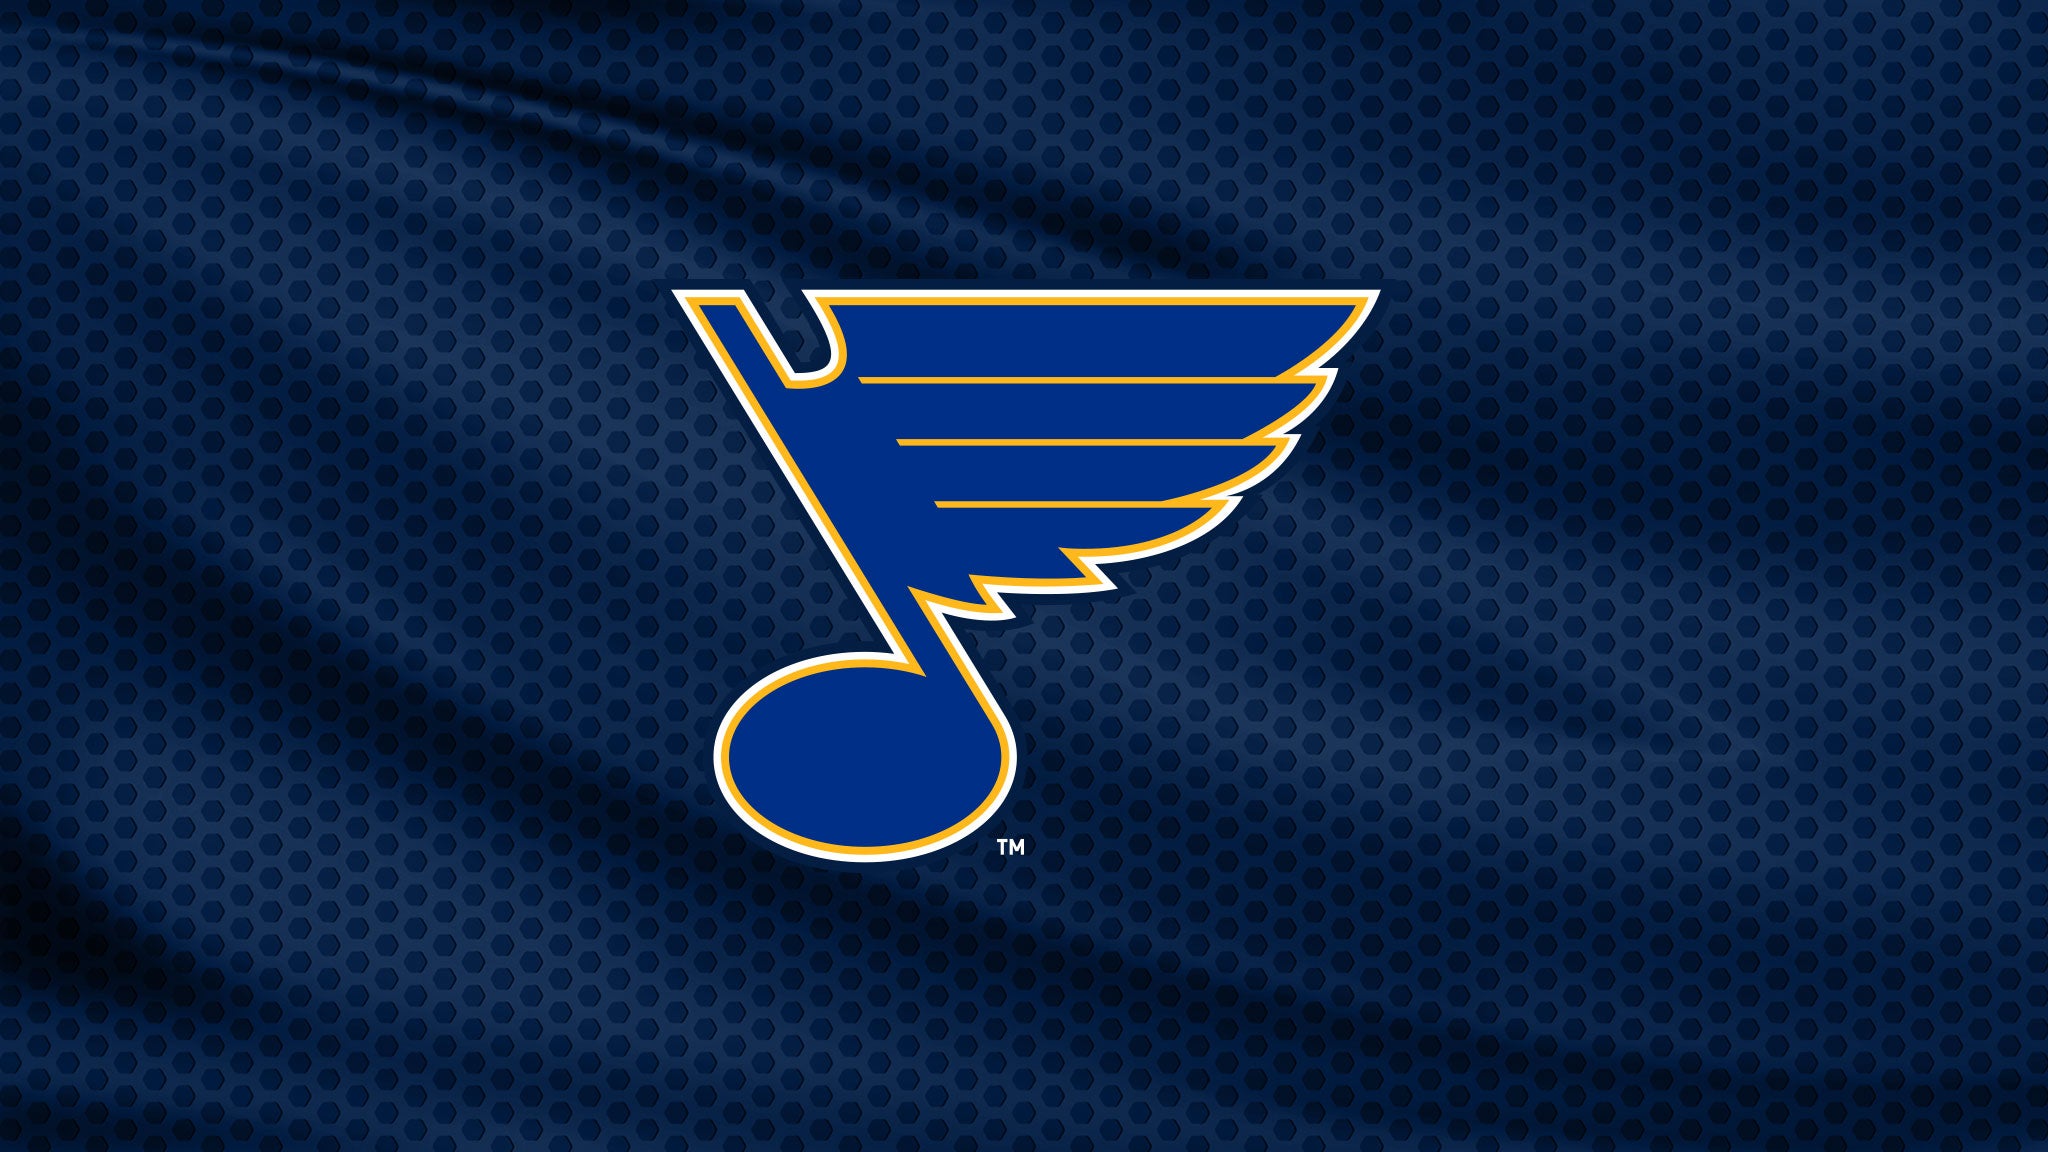 St. Louis Blues v Toronto Maple Leafs in St Louis promo photo for Ticketmaster presale offer code